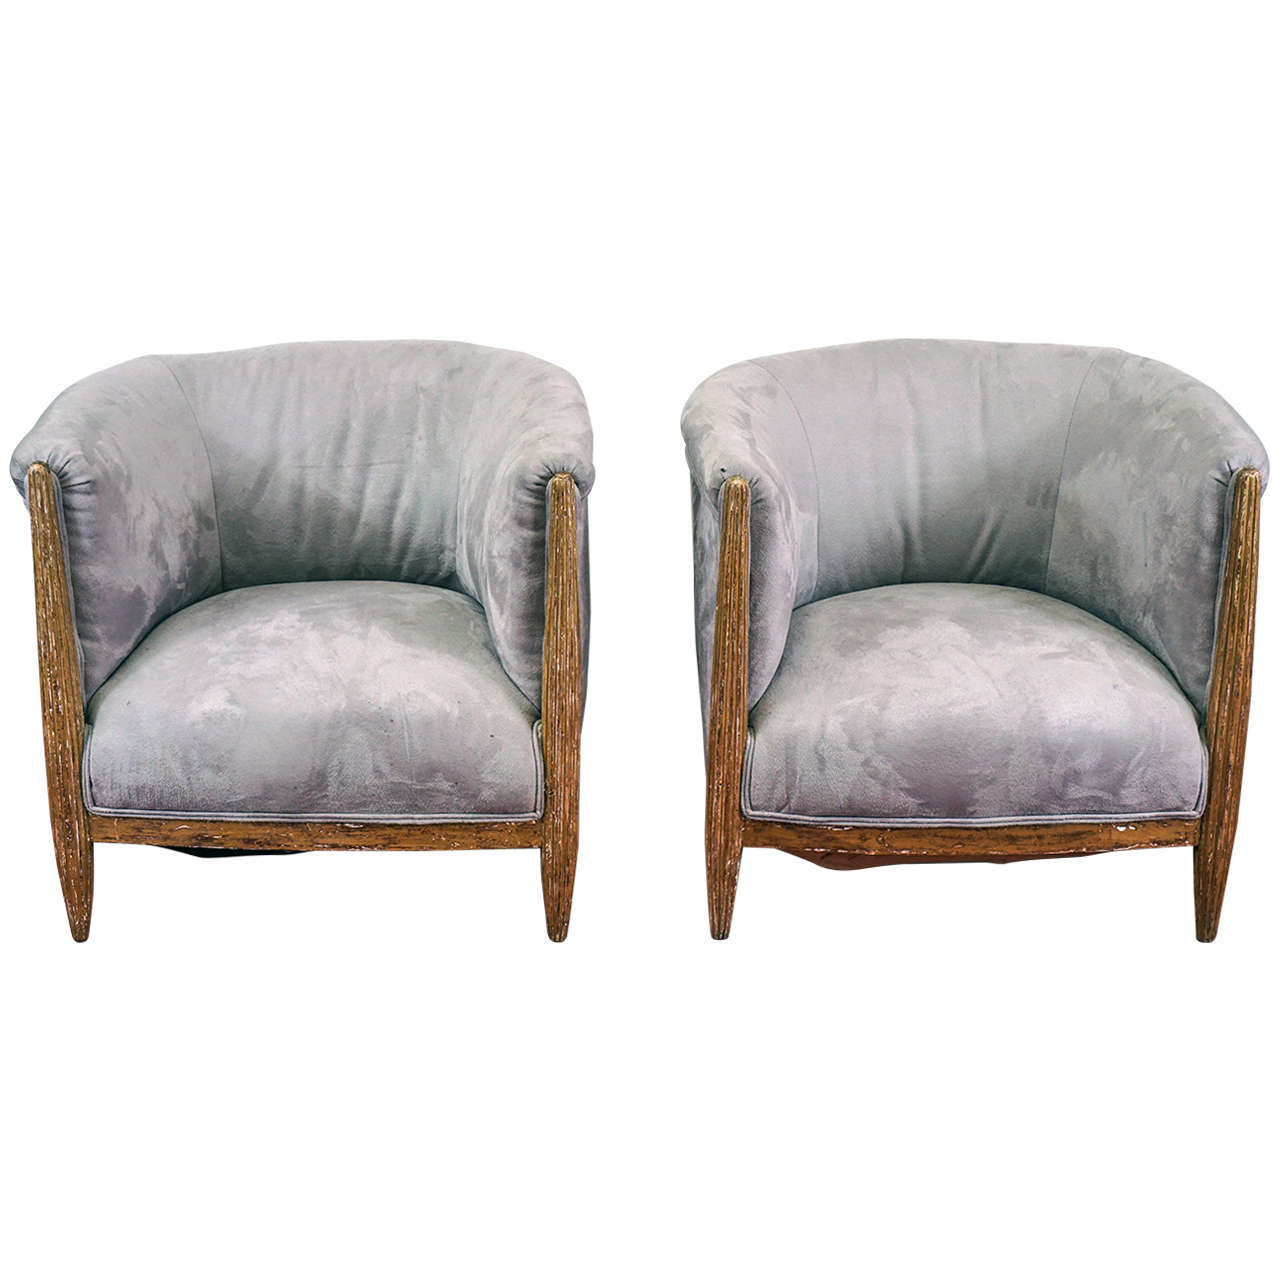 Pair of French Art Deco Barrel Back Armchairs